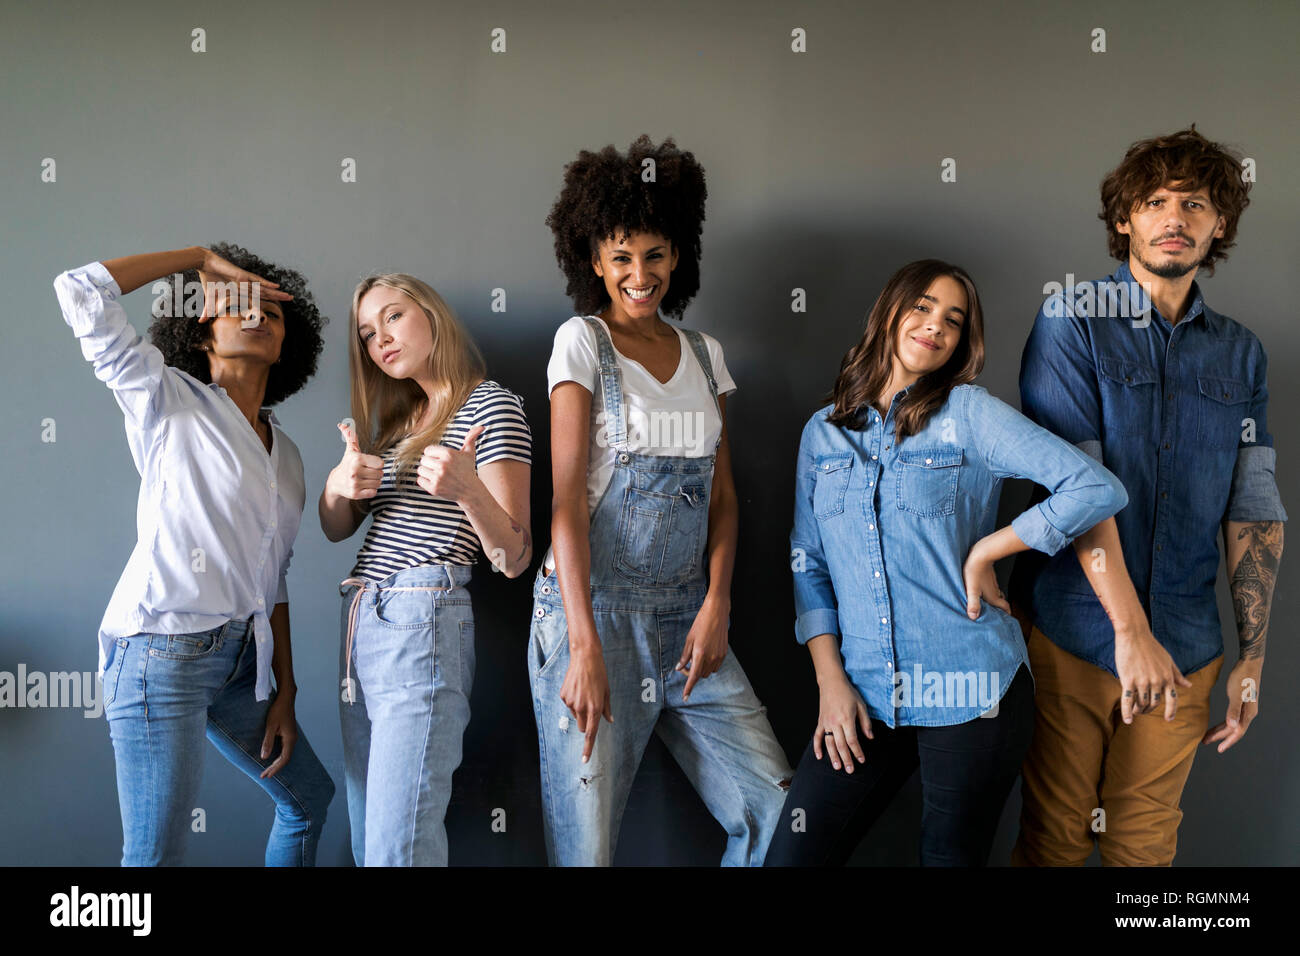 Group Of Young Modern People Posing Together With Fun. Urban Lifestyle.  Hip-hop Generation. Stock Photo, Picture and Royalty Free Image. Image  33908025.